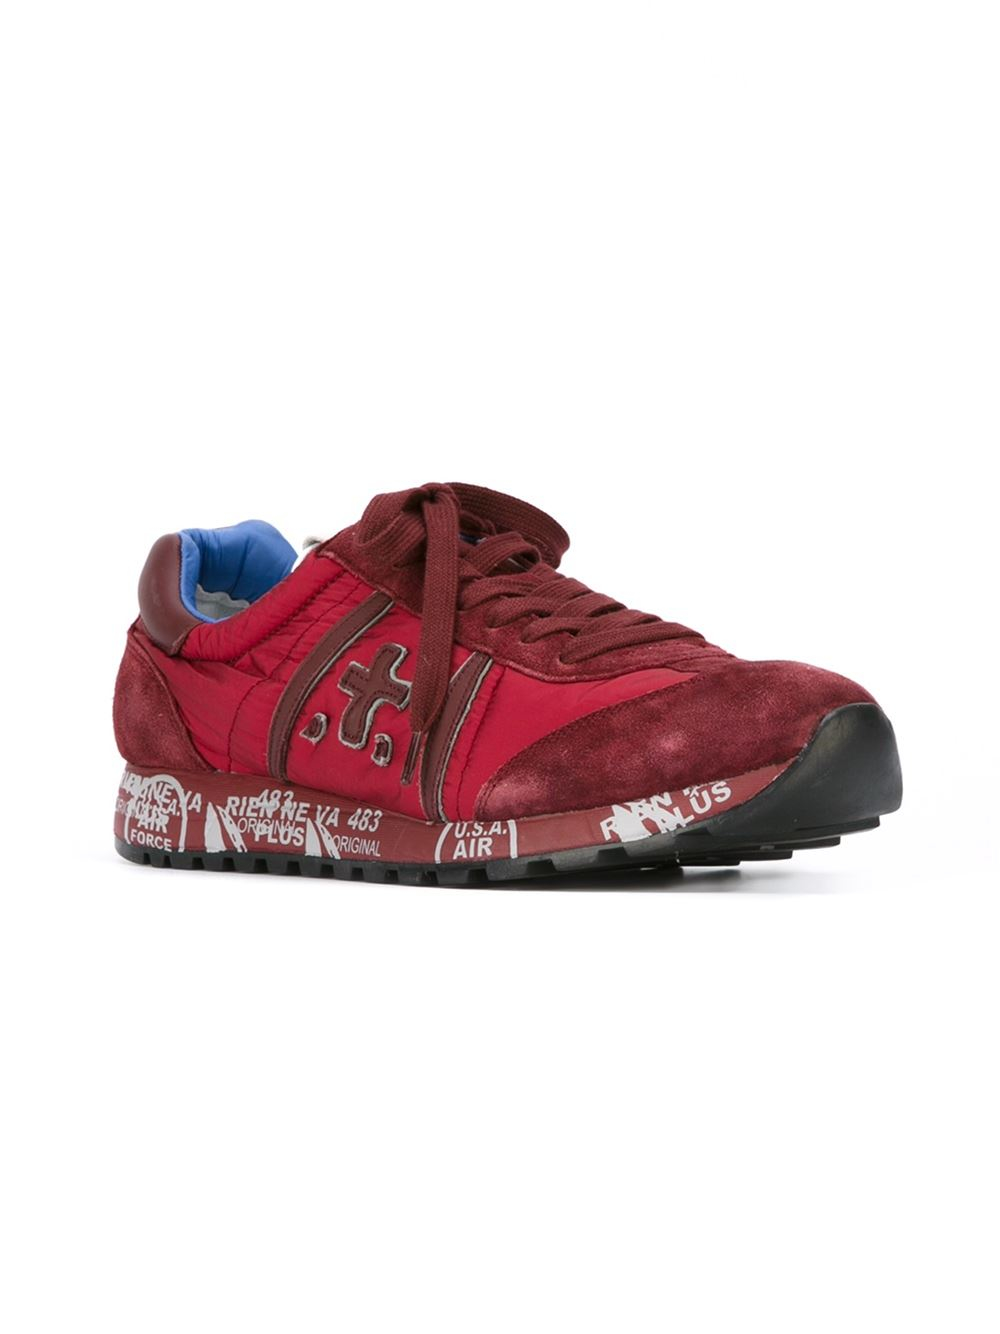 Lyst - Premiata 'lucy' Sneakers in Red for Men